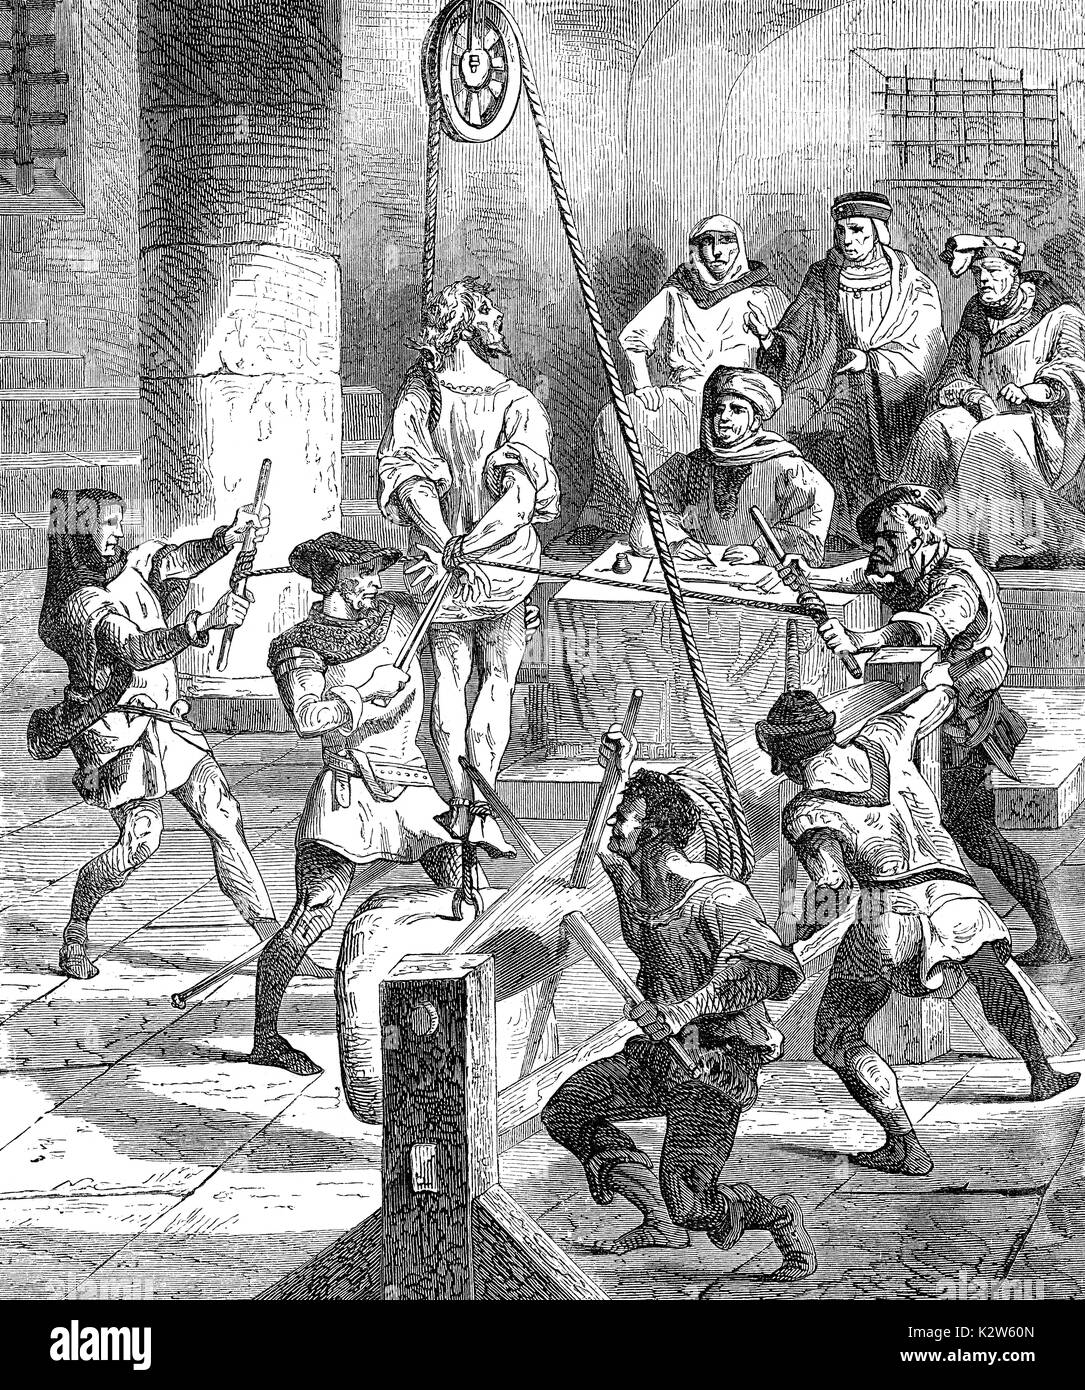 Inquisition, the cruel torture methods of the Church in the 16th century Stock Photo